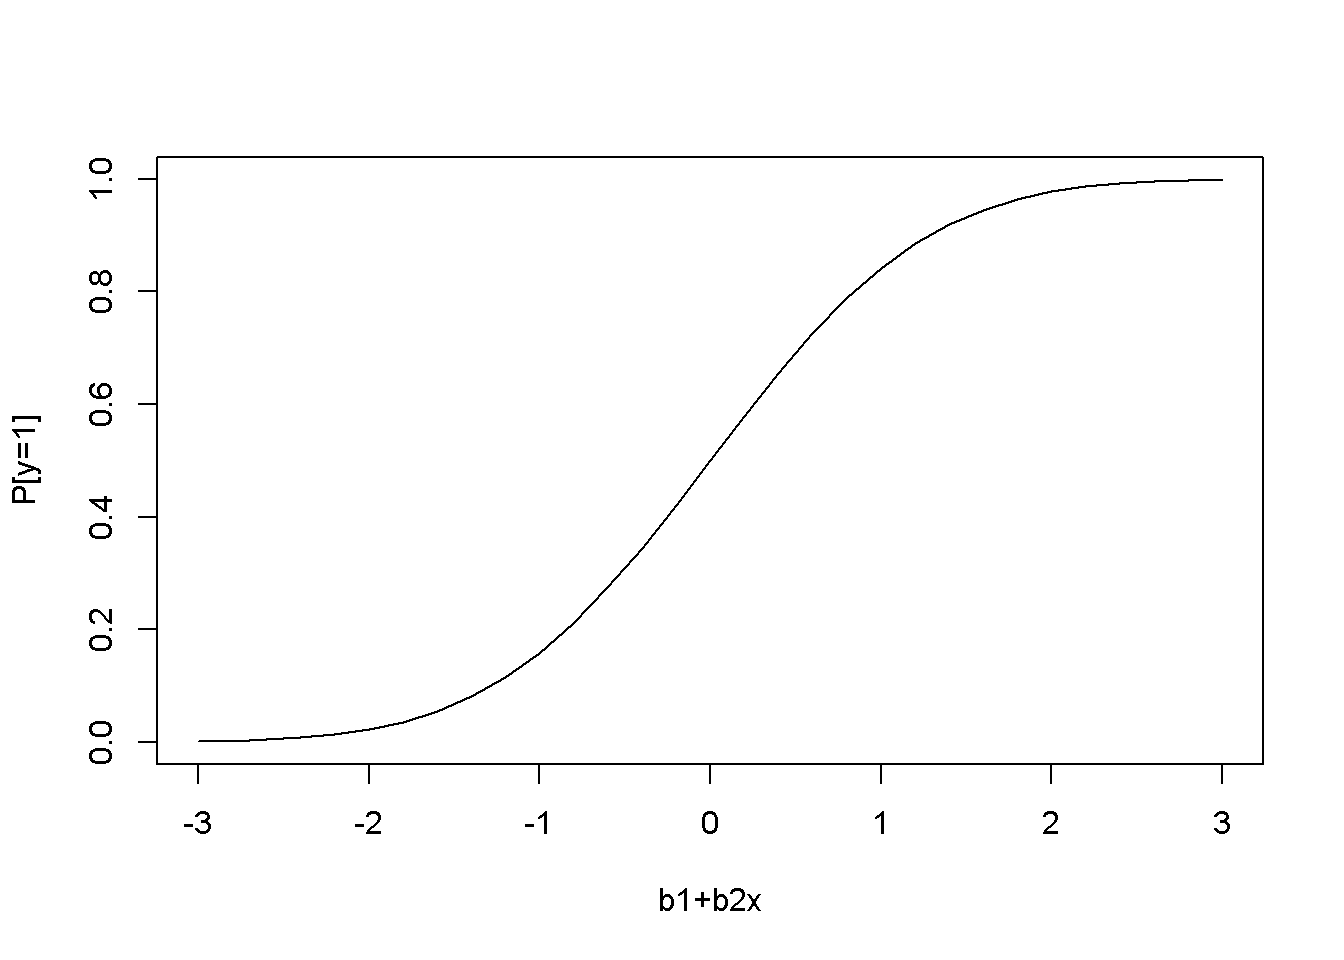 The shape of the probit function is the standard normal distribution